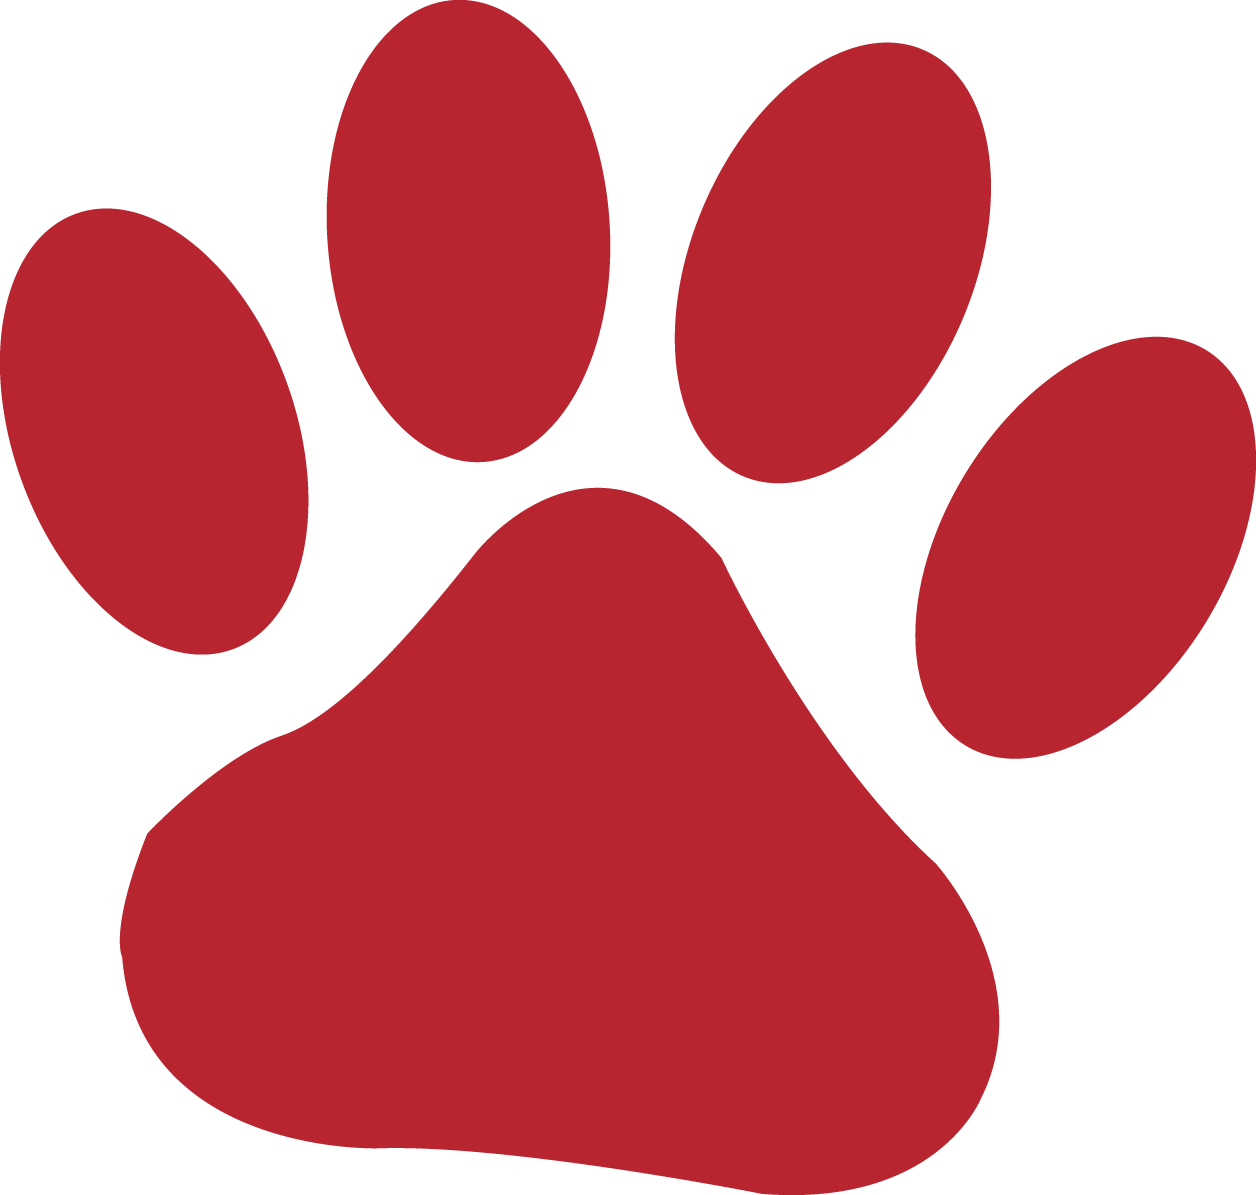 Details About 36 PAW PRINT WALL STICKER DECAL 3D LENS VINYL 10 ...